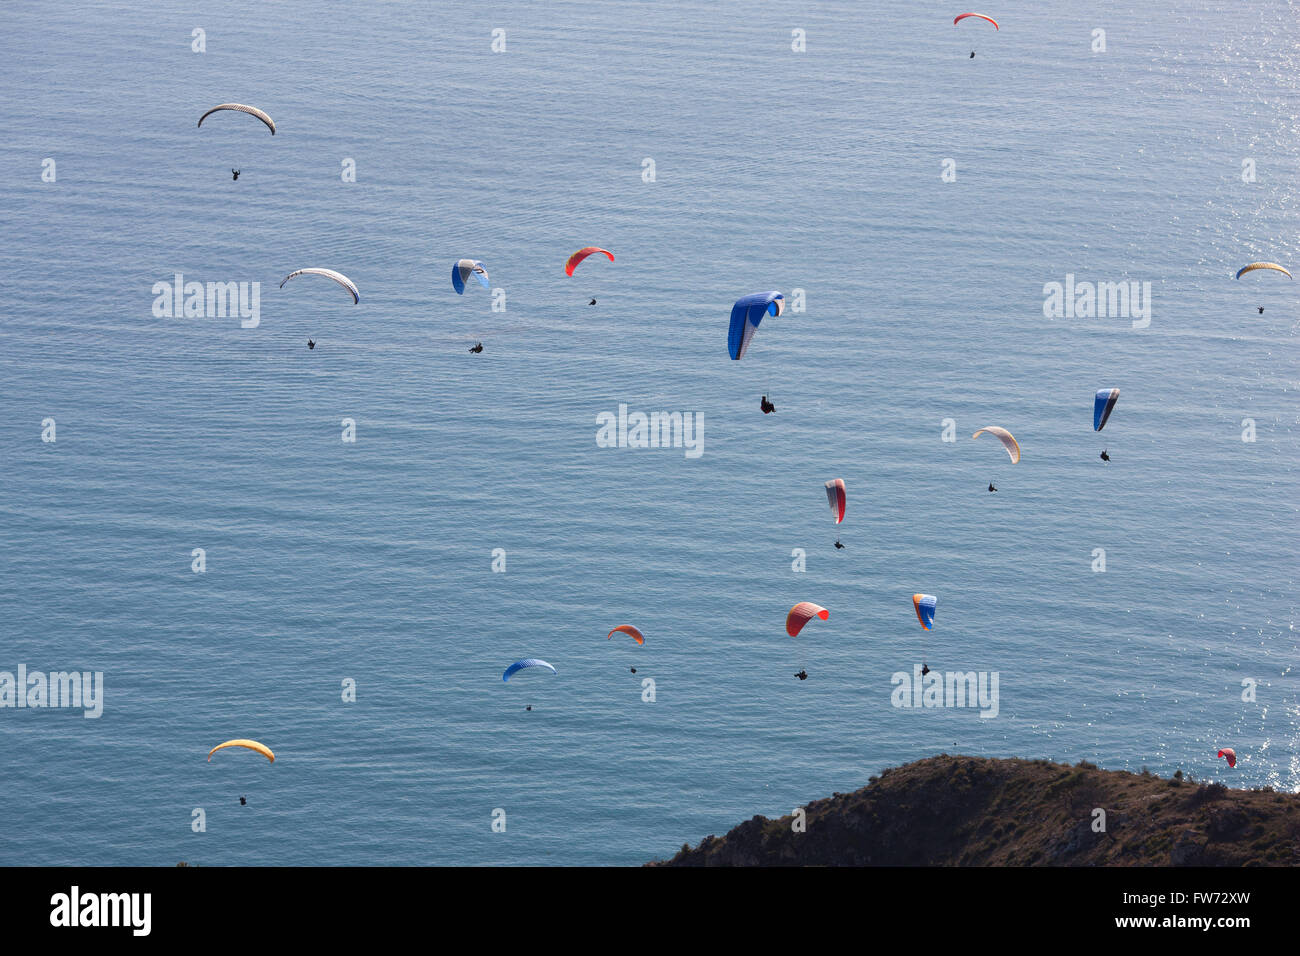 Cluster of 16 paragliders soaring over the Mediterranean Sea. Roquebrune-Cap-Martin, Alpes-Maritimes, French Riviera, France. Stock Photo